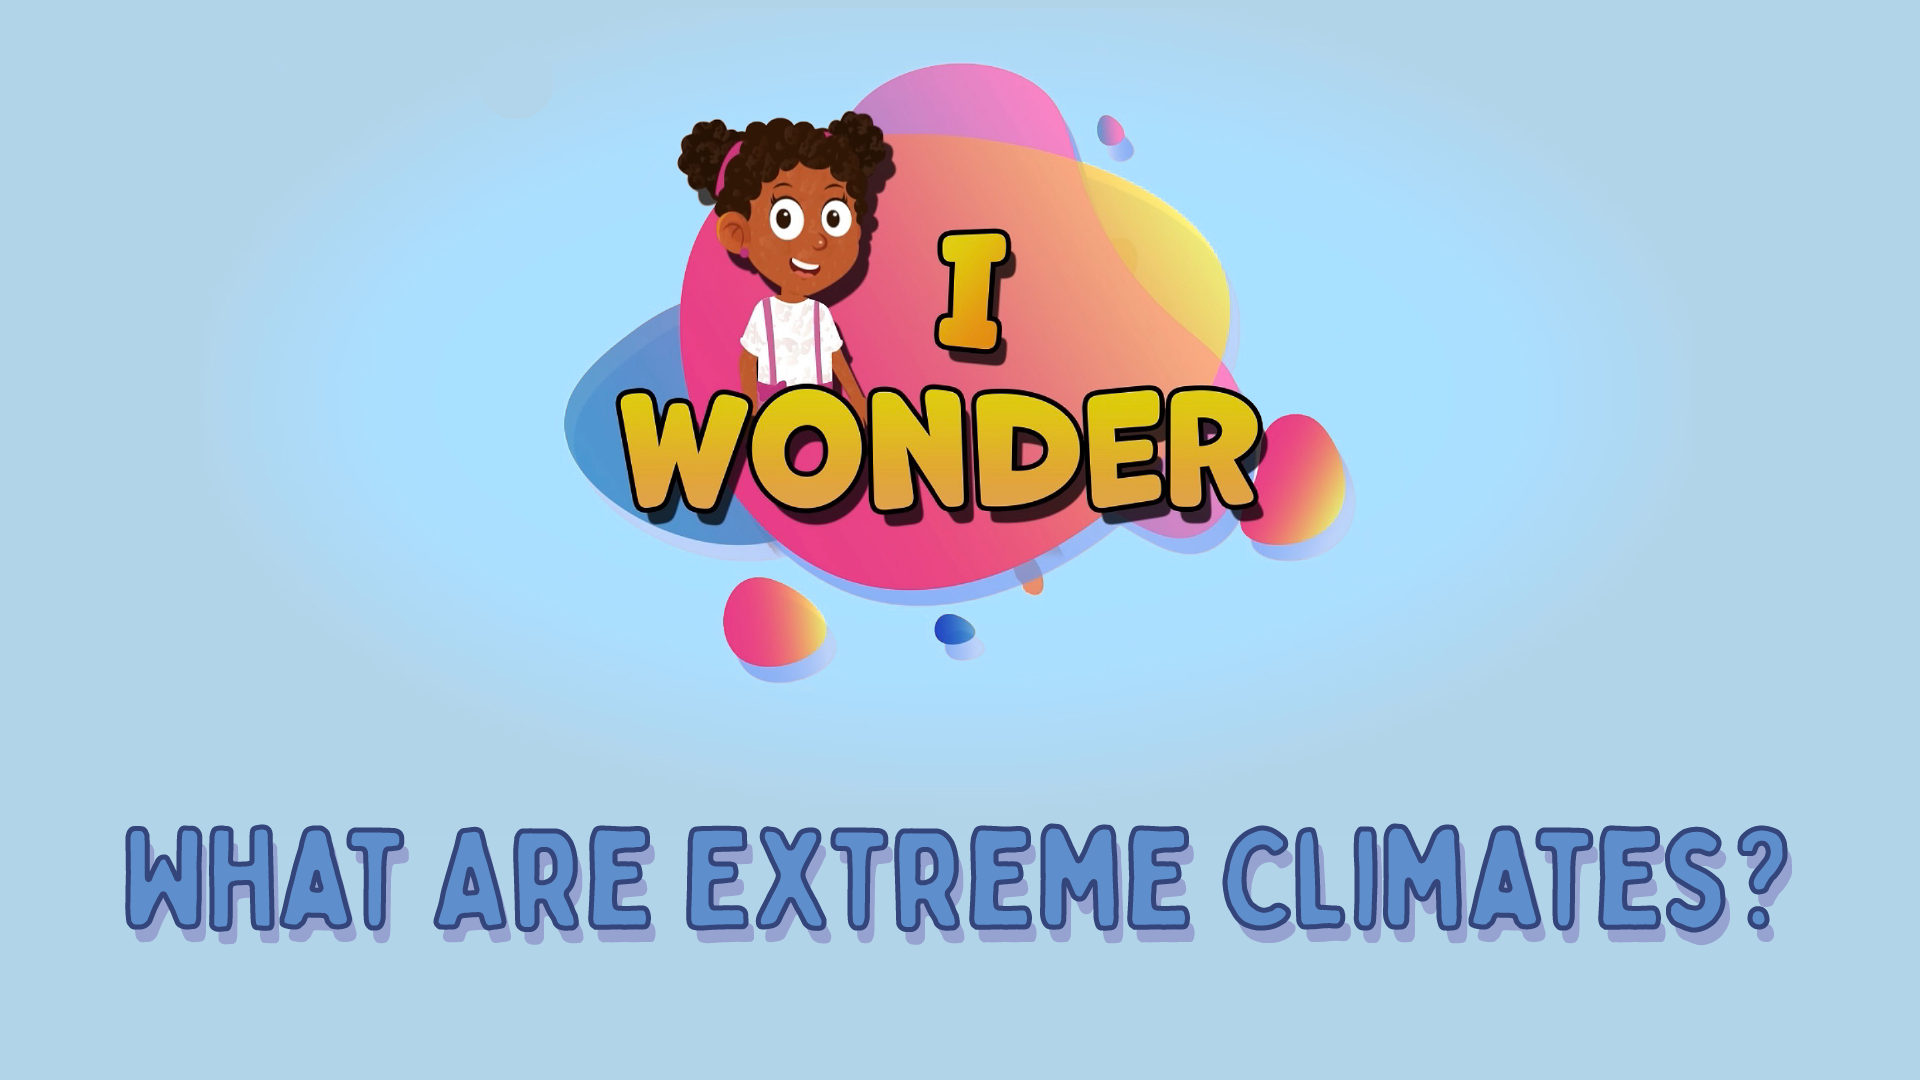 What Are Extreme Climates?